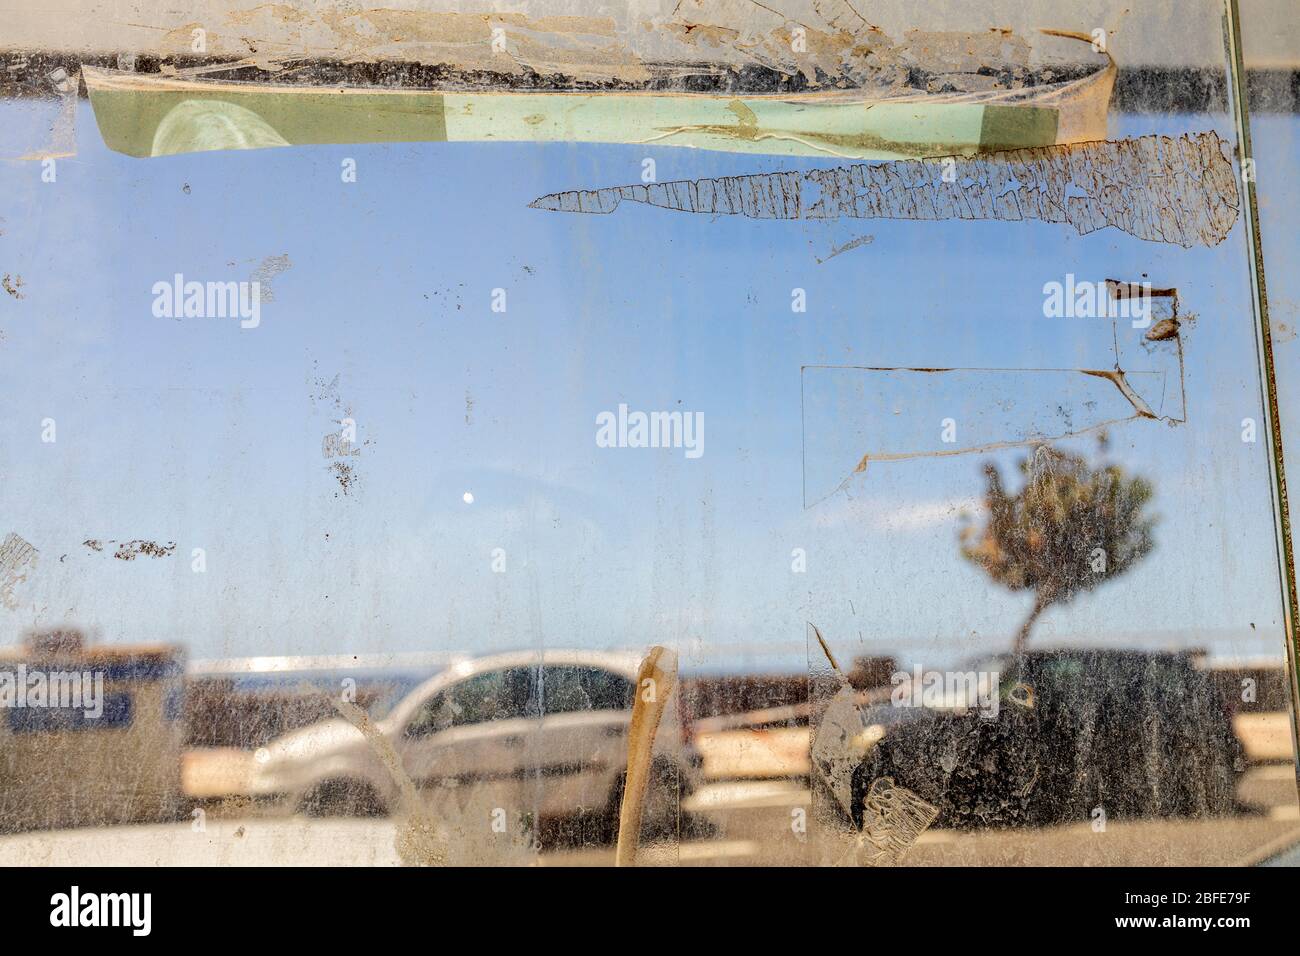 Dirty textured glass on an old bus shelter between camera and the seafront, coronavirus pandemic, Playa San Juan, Tenerife, Canary Islands, Stock Photo